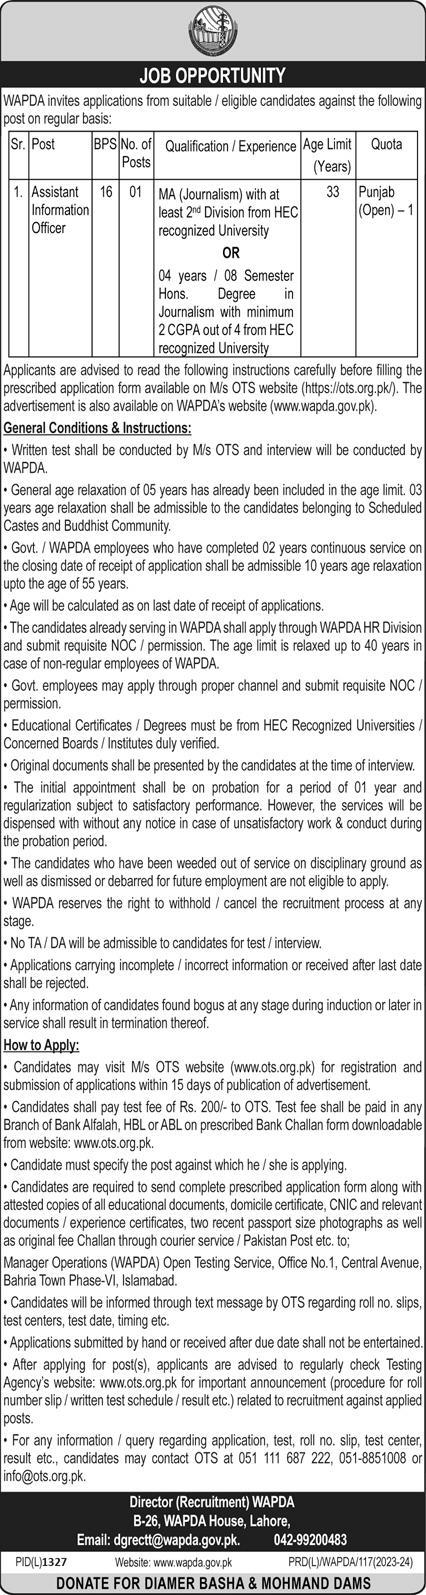 Join the Team at WAPDA in 2023 - Various Opportunities Available Now Advertisement